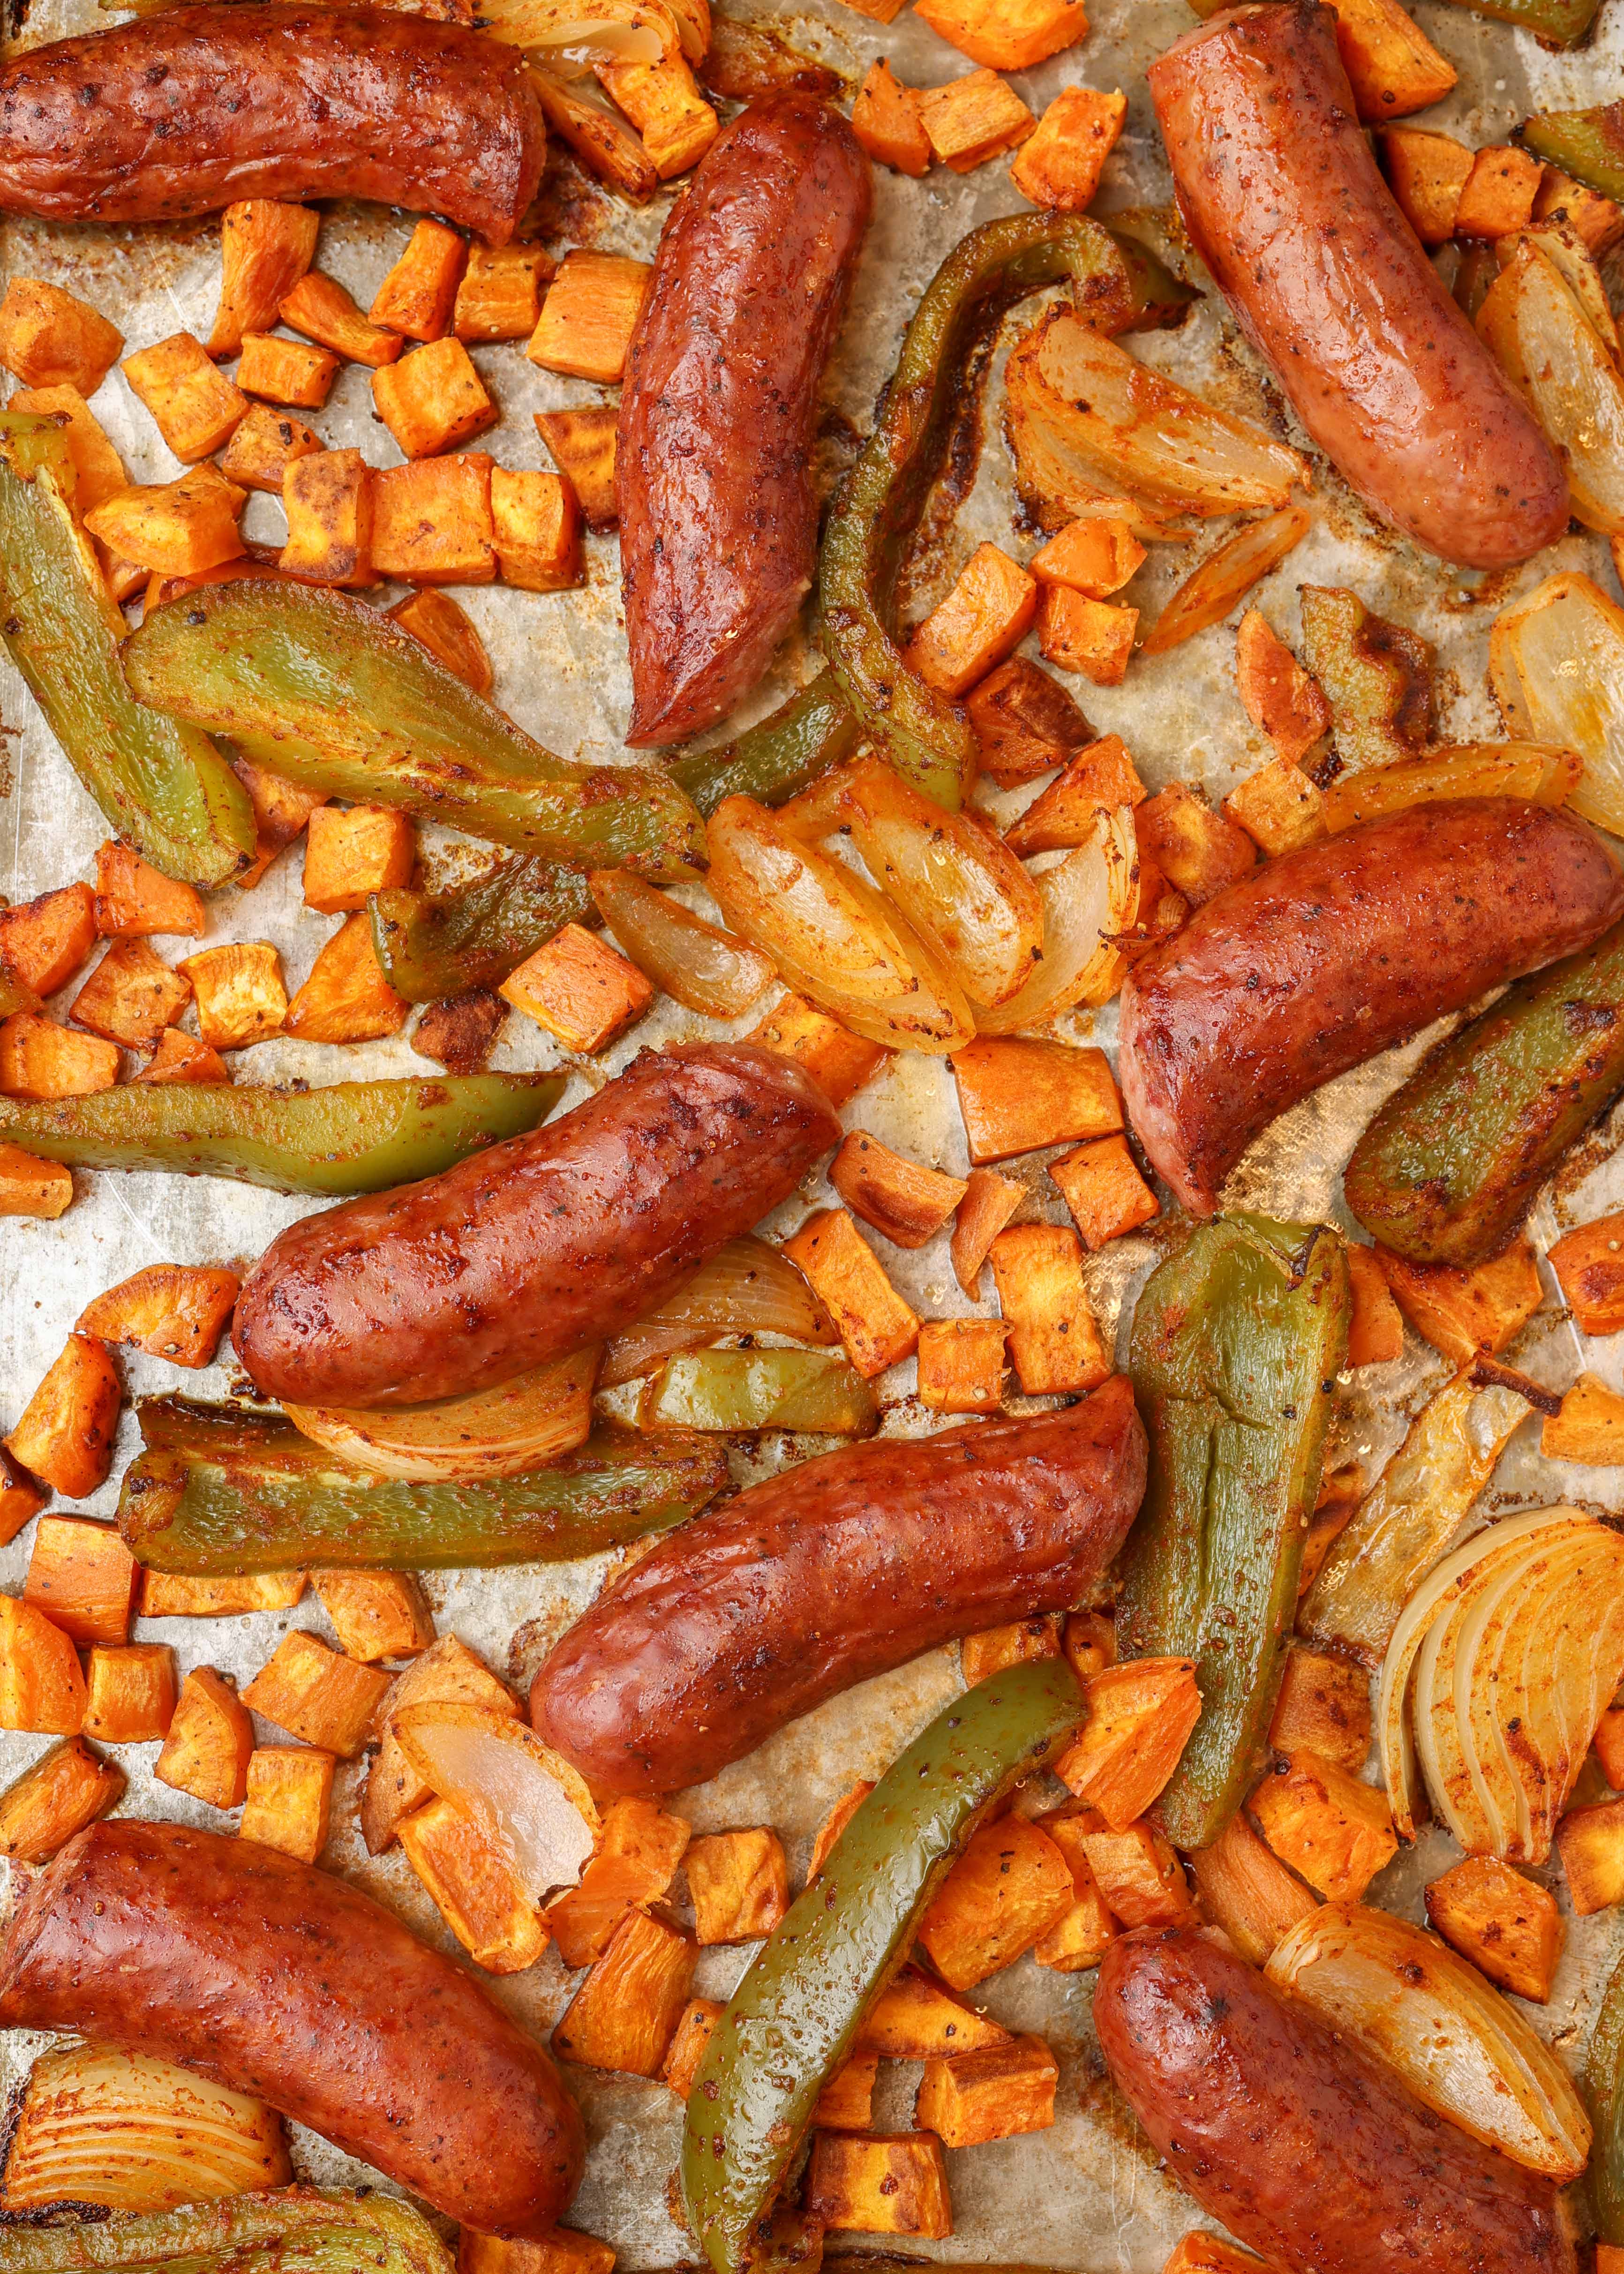 https://barefeetinthekitchen.com/wp-content/uploads/2016/10/Sheet-Pan-Sausage-with-Sweet-Potatoes-and-Peppers-BFK-1-1-of-1.jpg